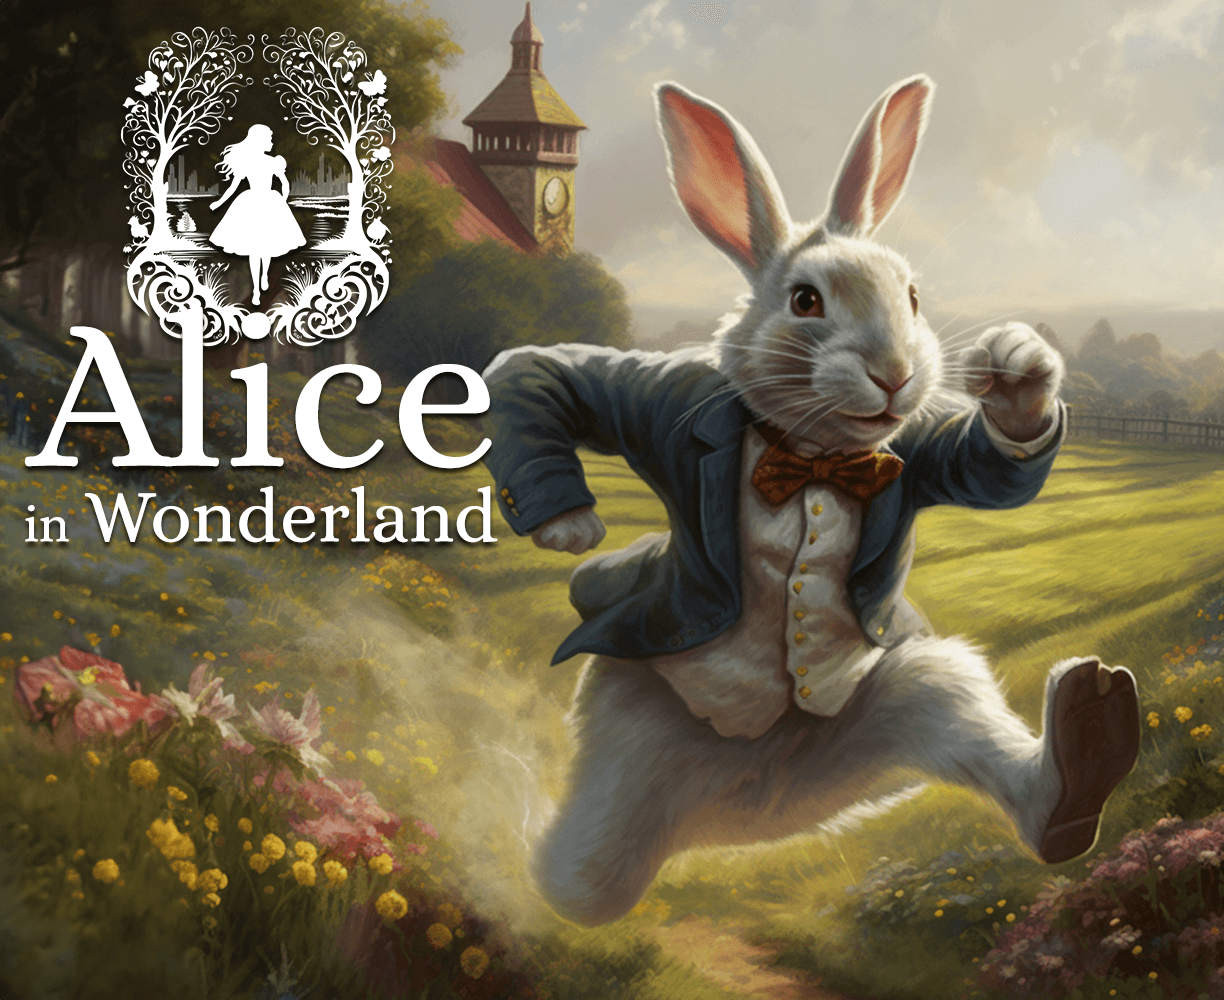 The cover art for the episode The Verdict from the comics series Alice in Wonderland, which is number 17 in the series